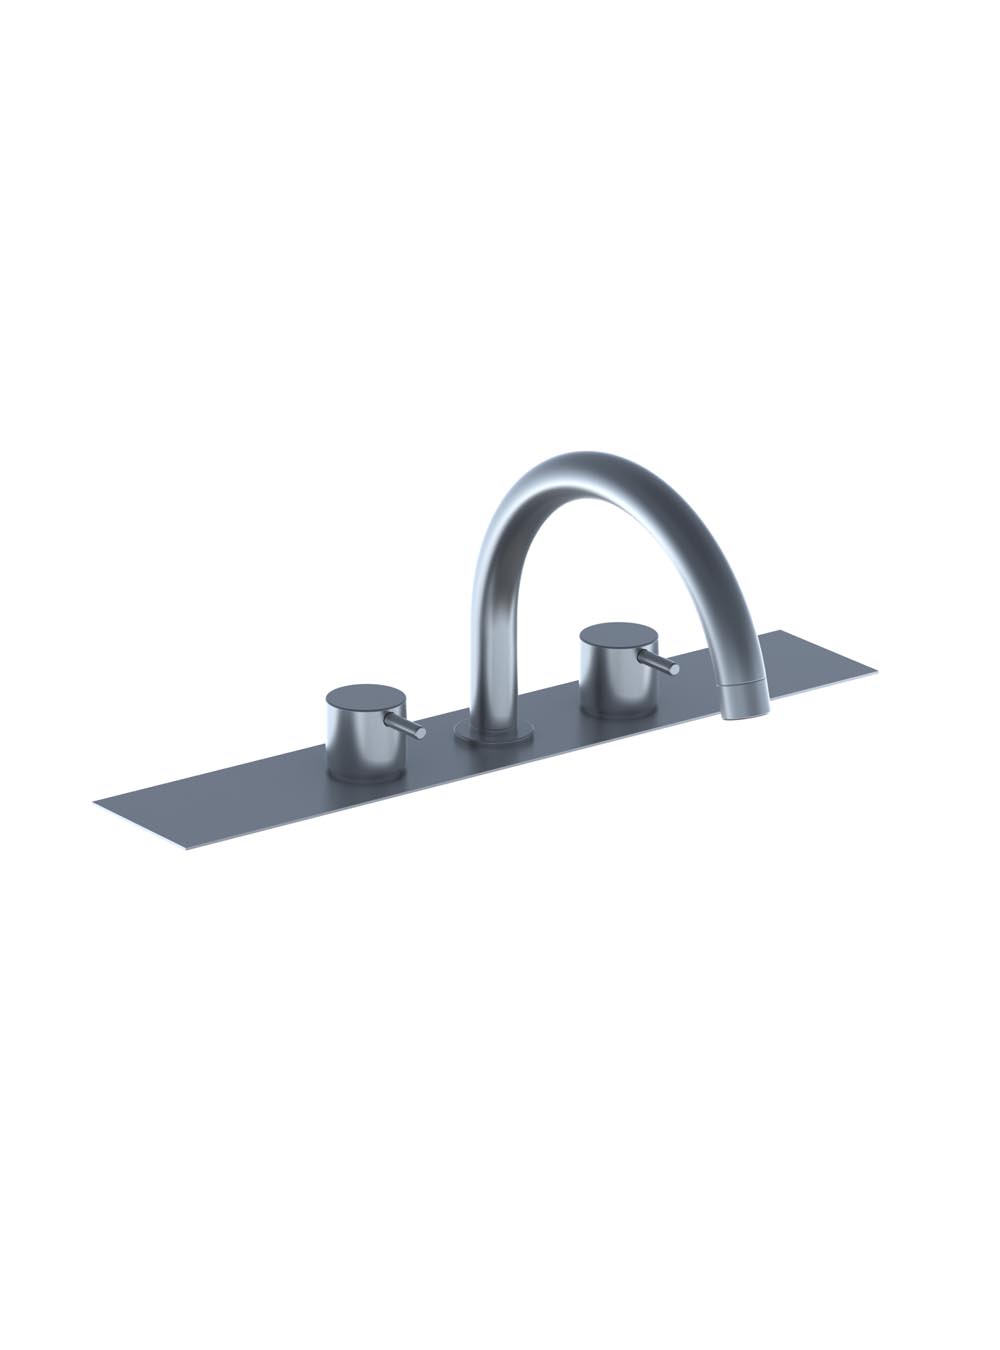 BK8: Two-handle mixer with swivel spout for bath filling. Complete with adjustable bracket and water c...